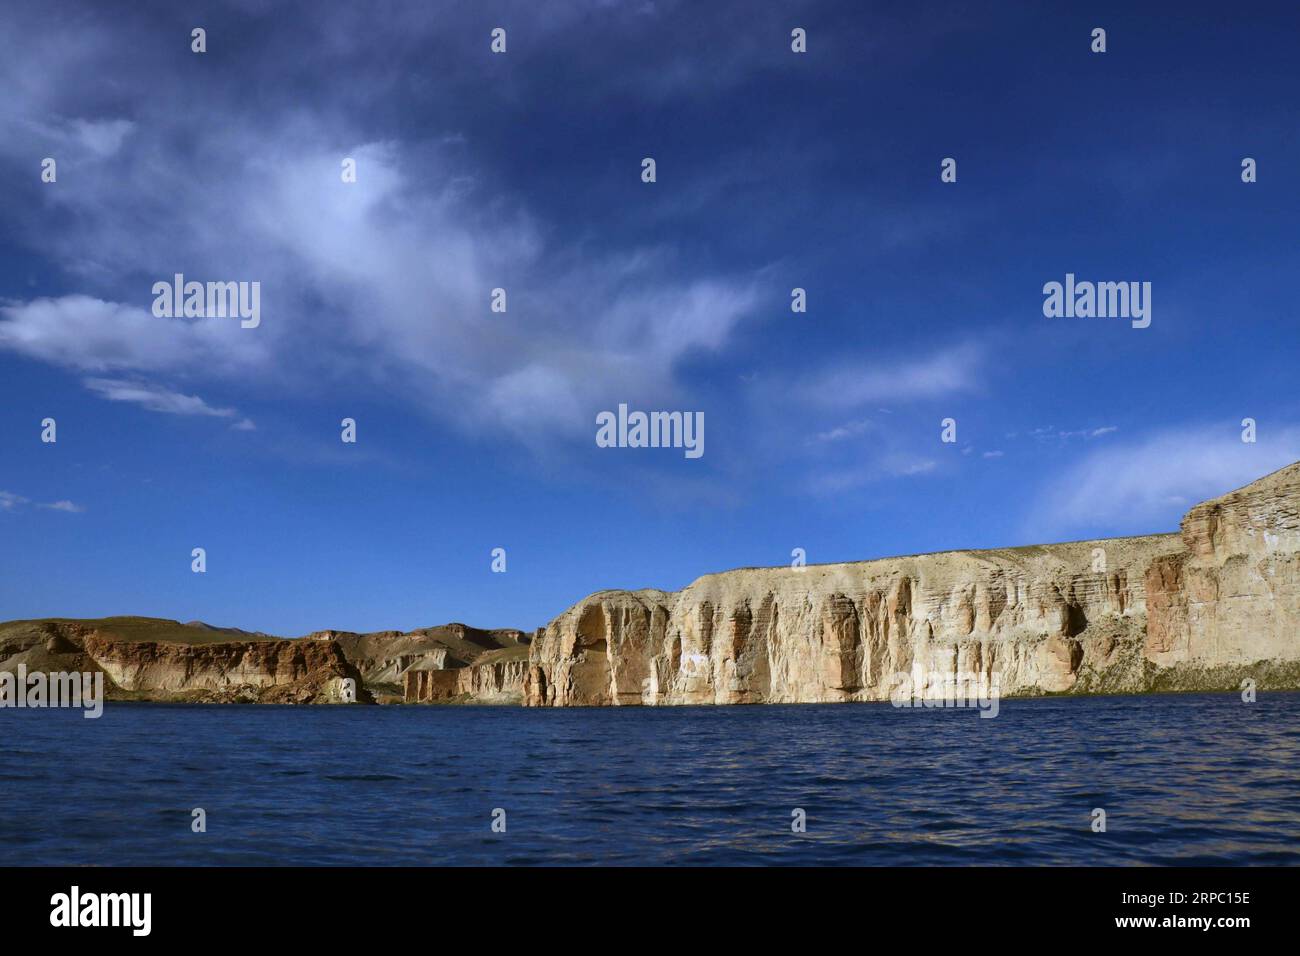 (190621) -- BAMYAN, June 21, 2019 -- Photo taken on June 19, 2019 shows the Band-e-Amir lake in Bamyan province, central Afghanistan. ) AFGHANISTAN-BAMYAN-BAND-E-AMIR LAKE NoorxAzizi PUBLICATIONxNOTxINxCHN Stock Photo